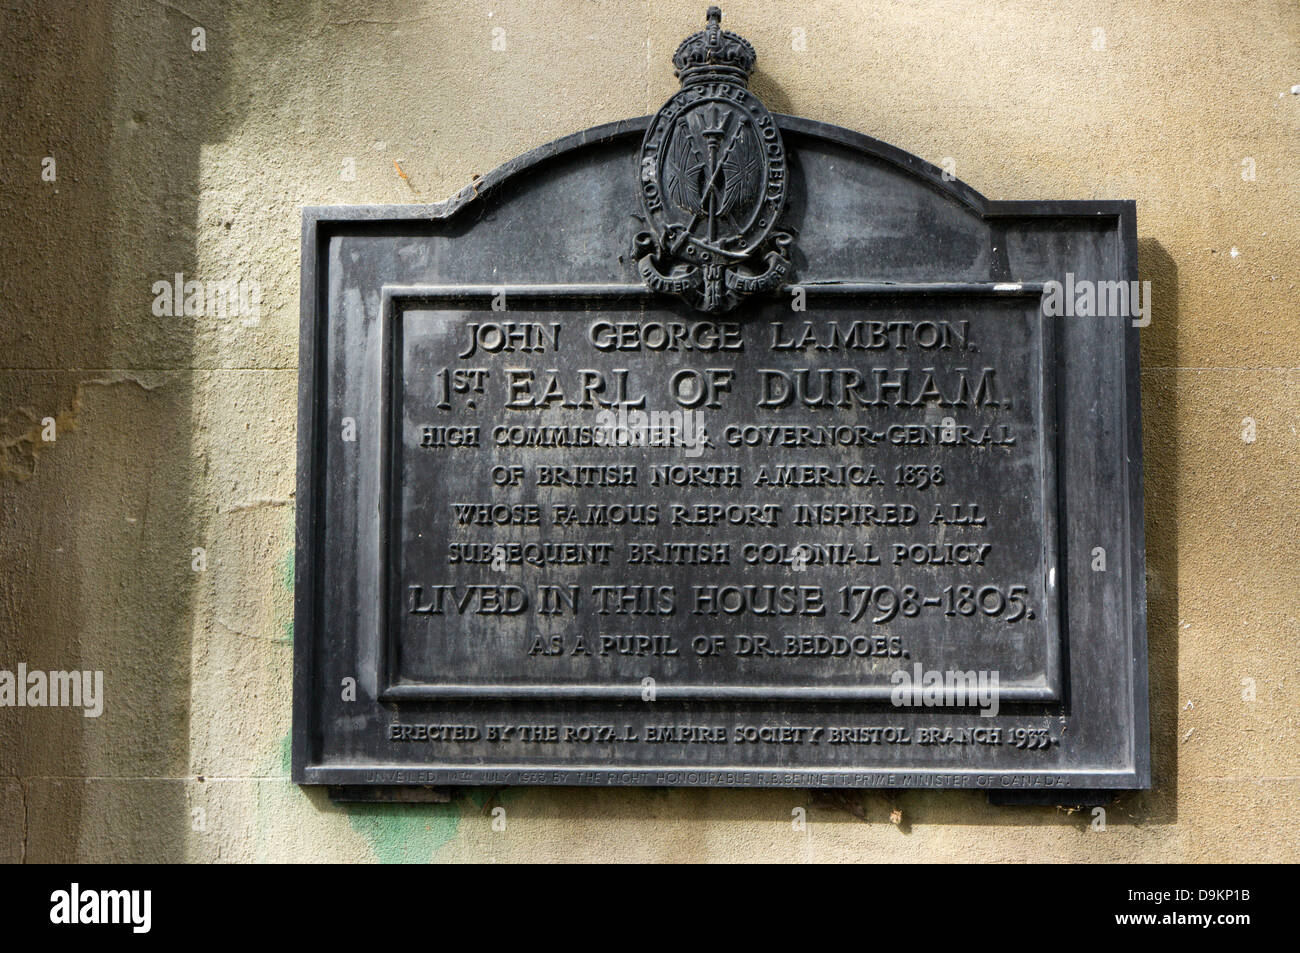 A plaque in Rodney Place, Bristol, marks a house lived in by the Earl of Durham, John George Lambton. Stock Photo